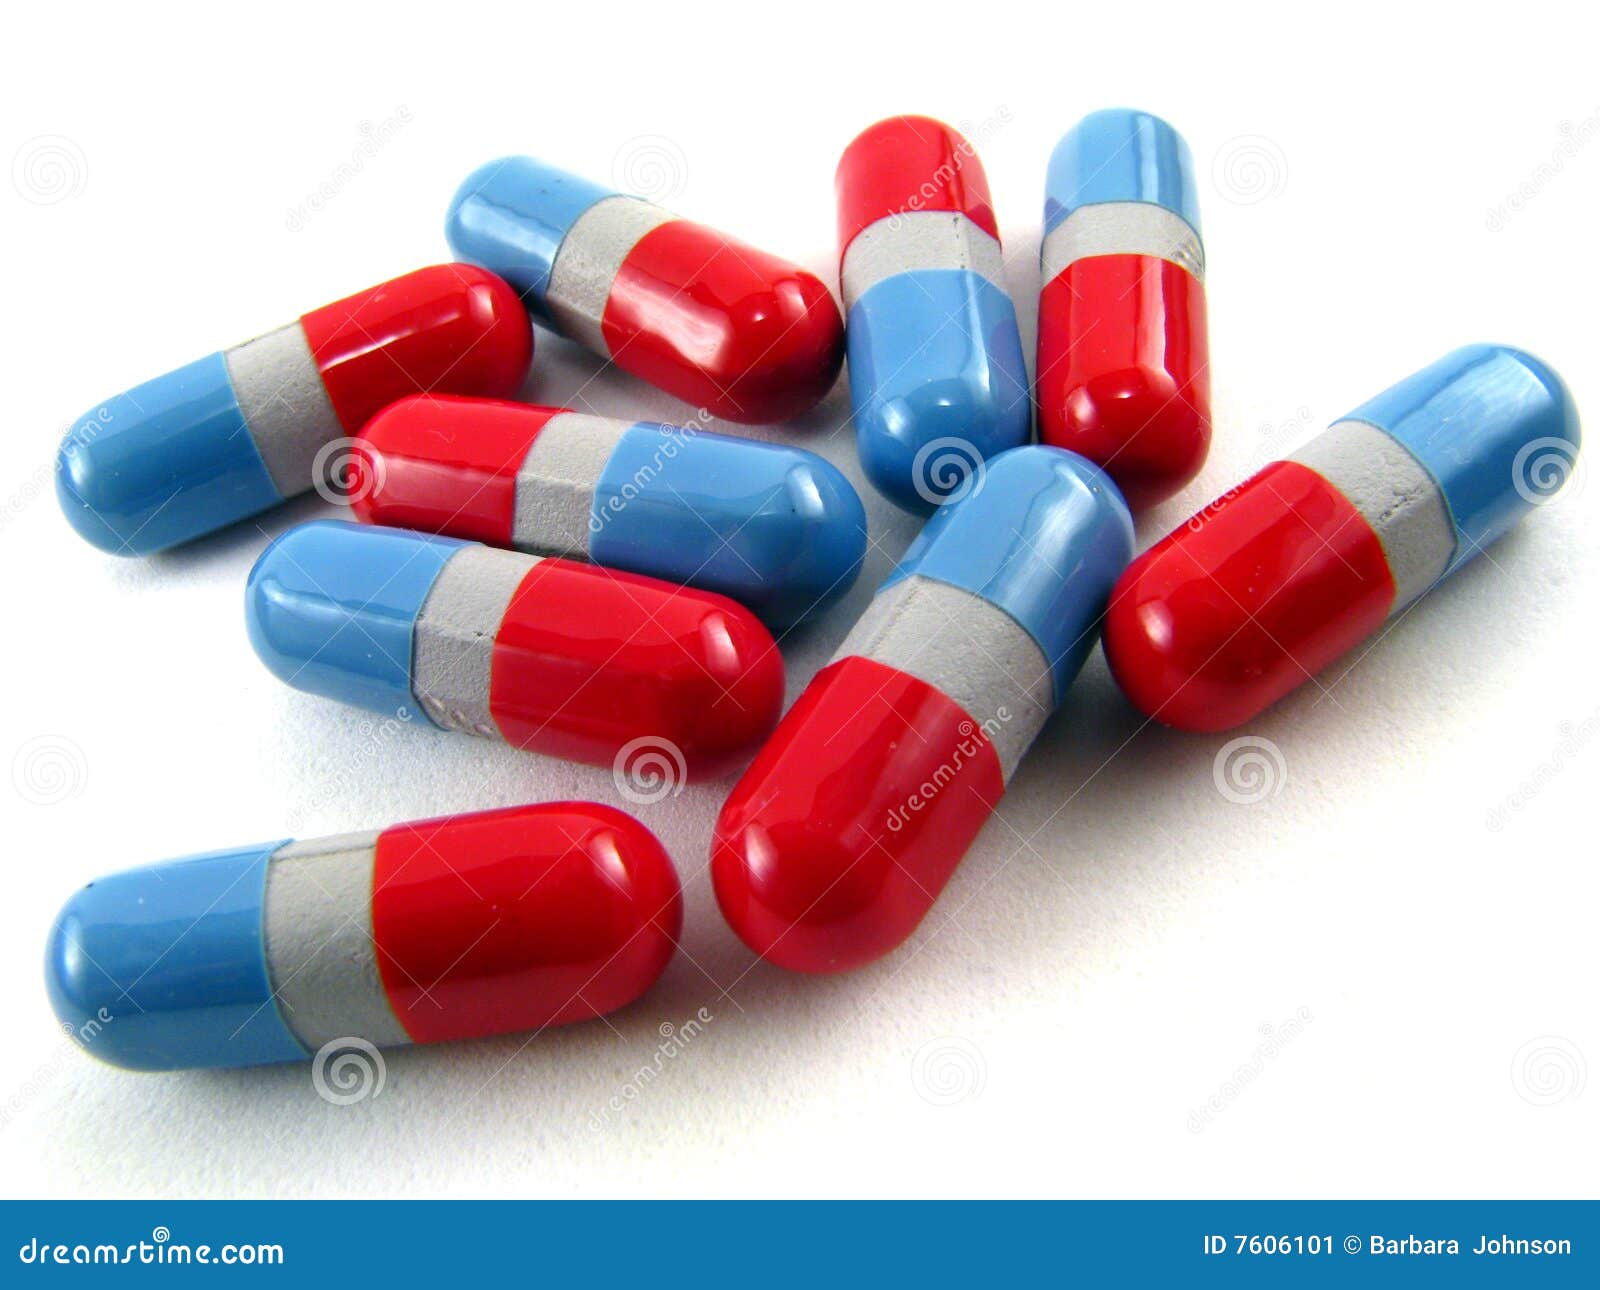 12,743 Blue Pills Stock Photos Free & Stock from Dreamstime